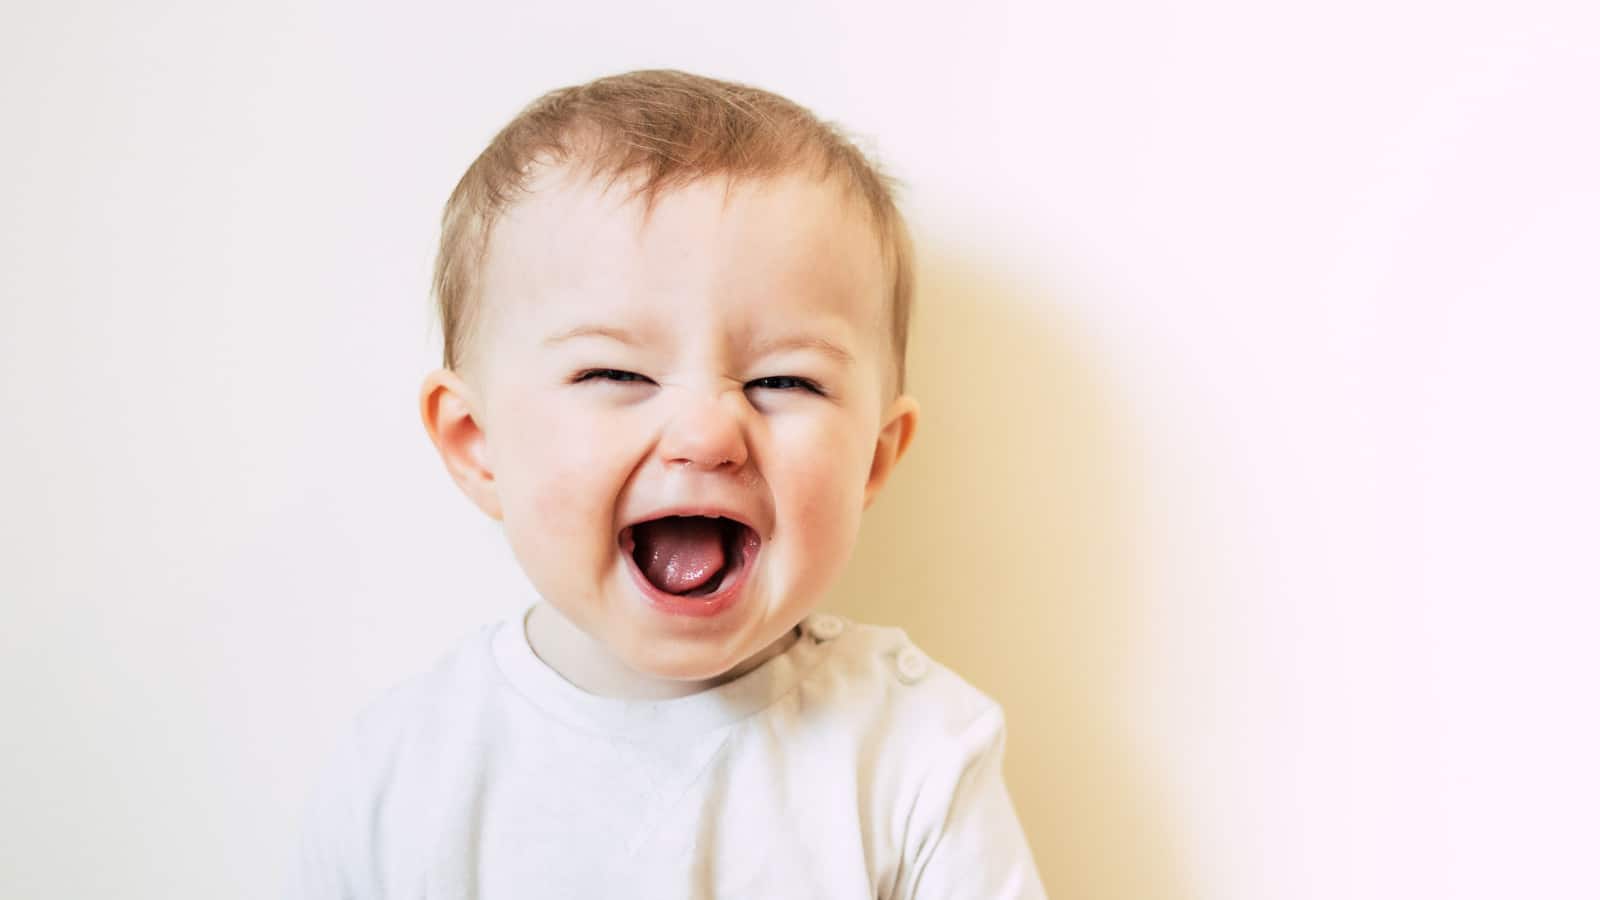 Baby with flu laughing